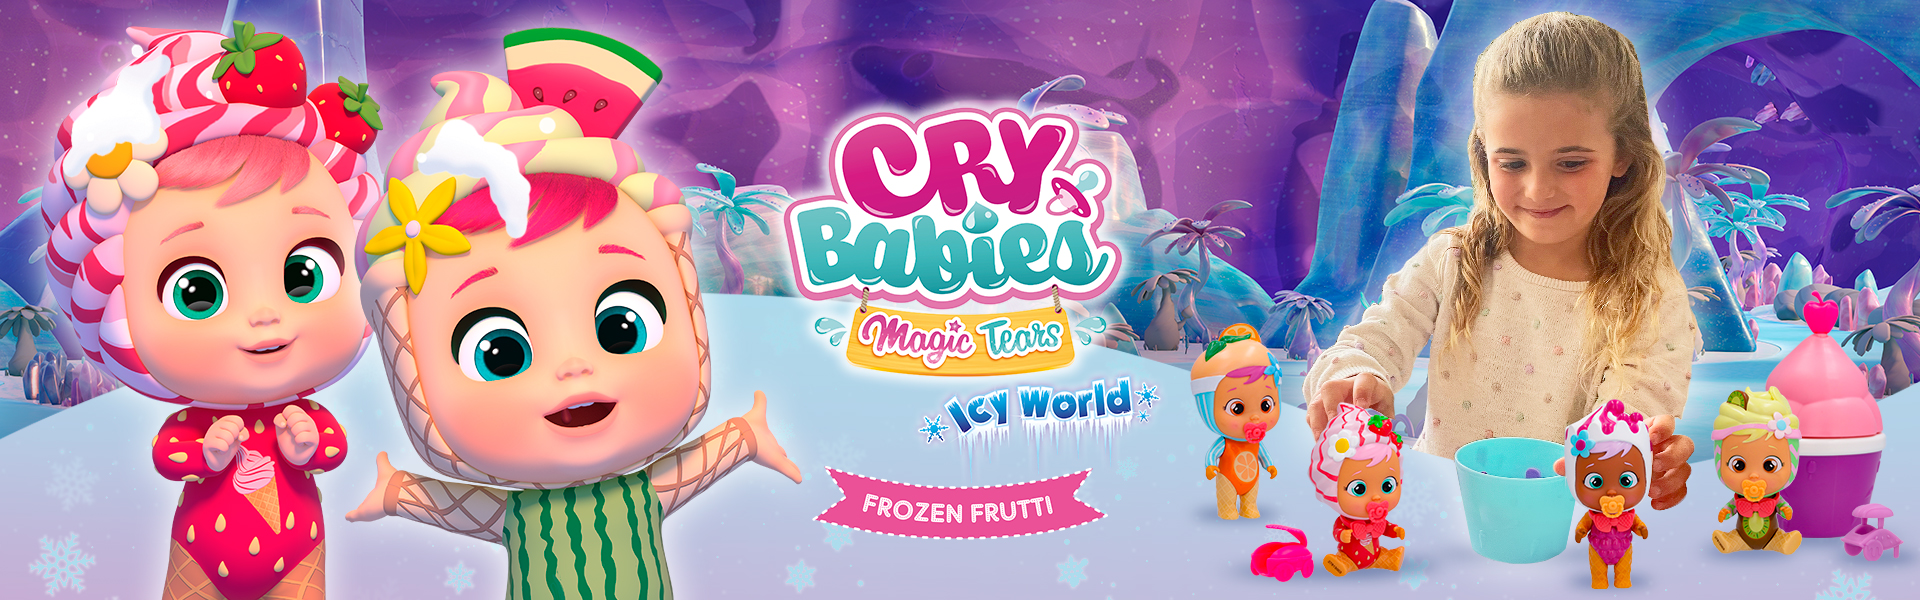 Cry Babies Magic Tears Icy World Dinos + Frozen Frutti - Kitoons